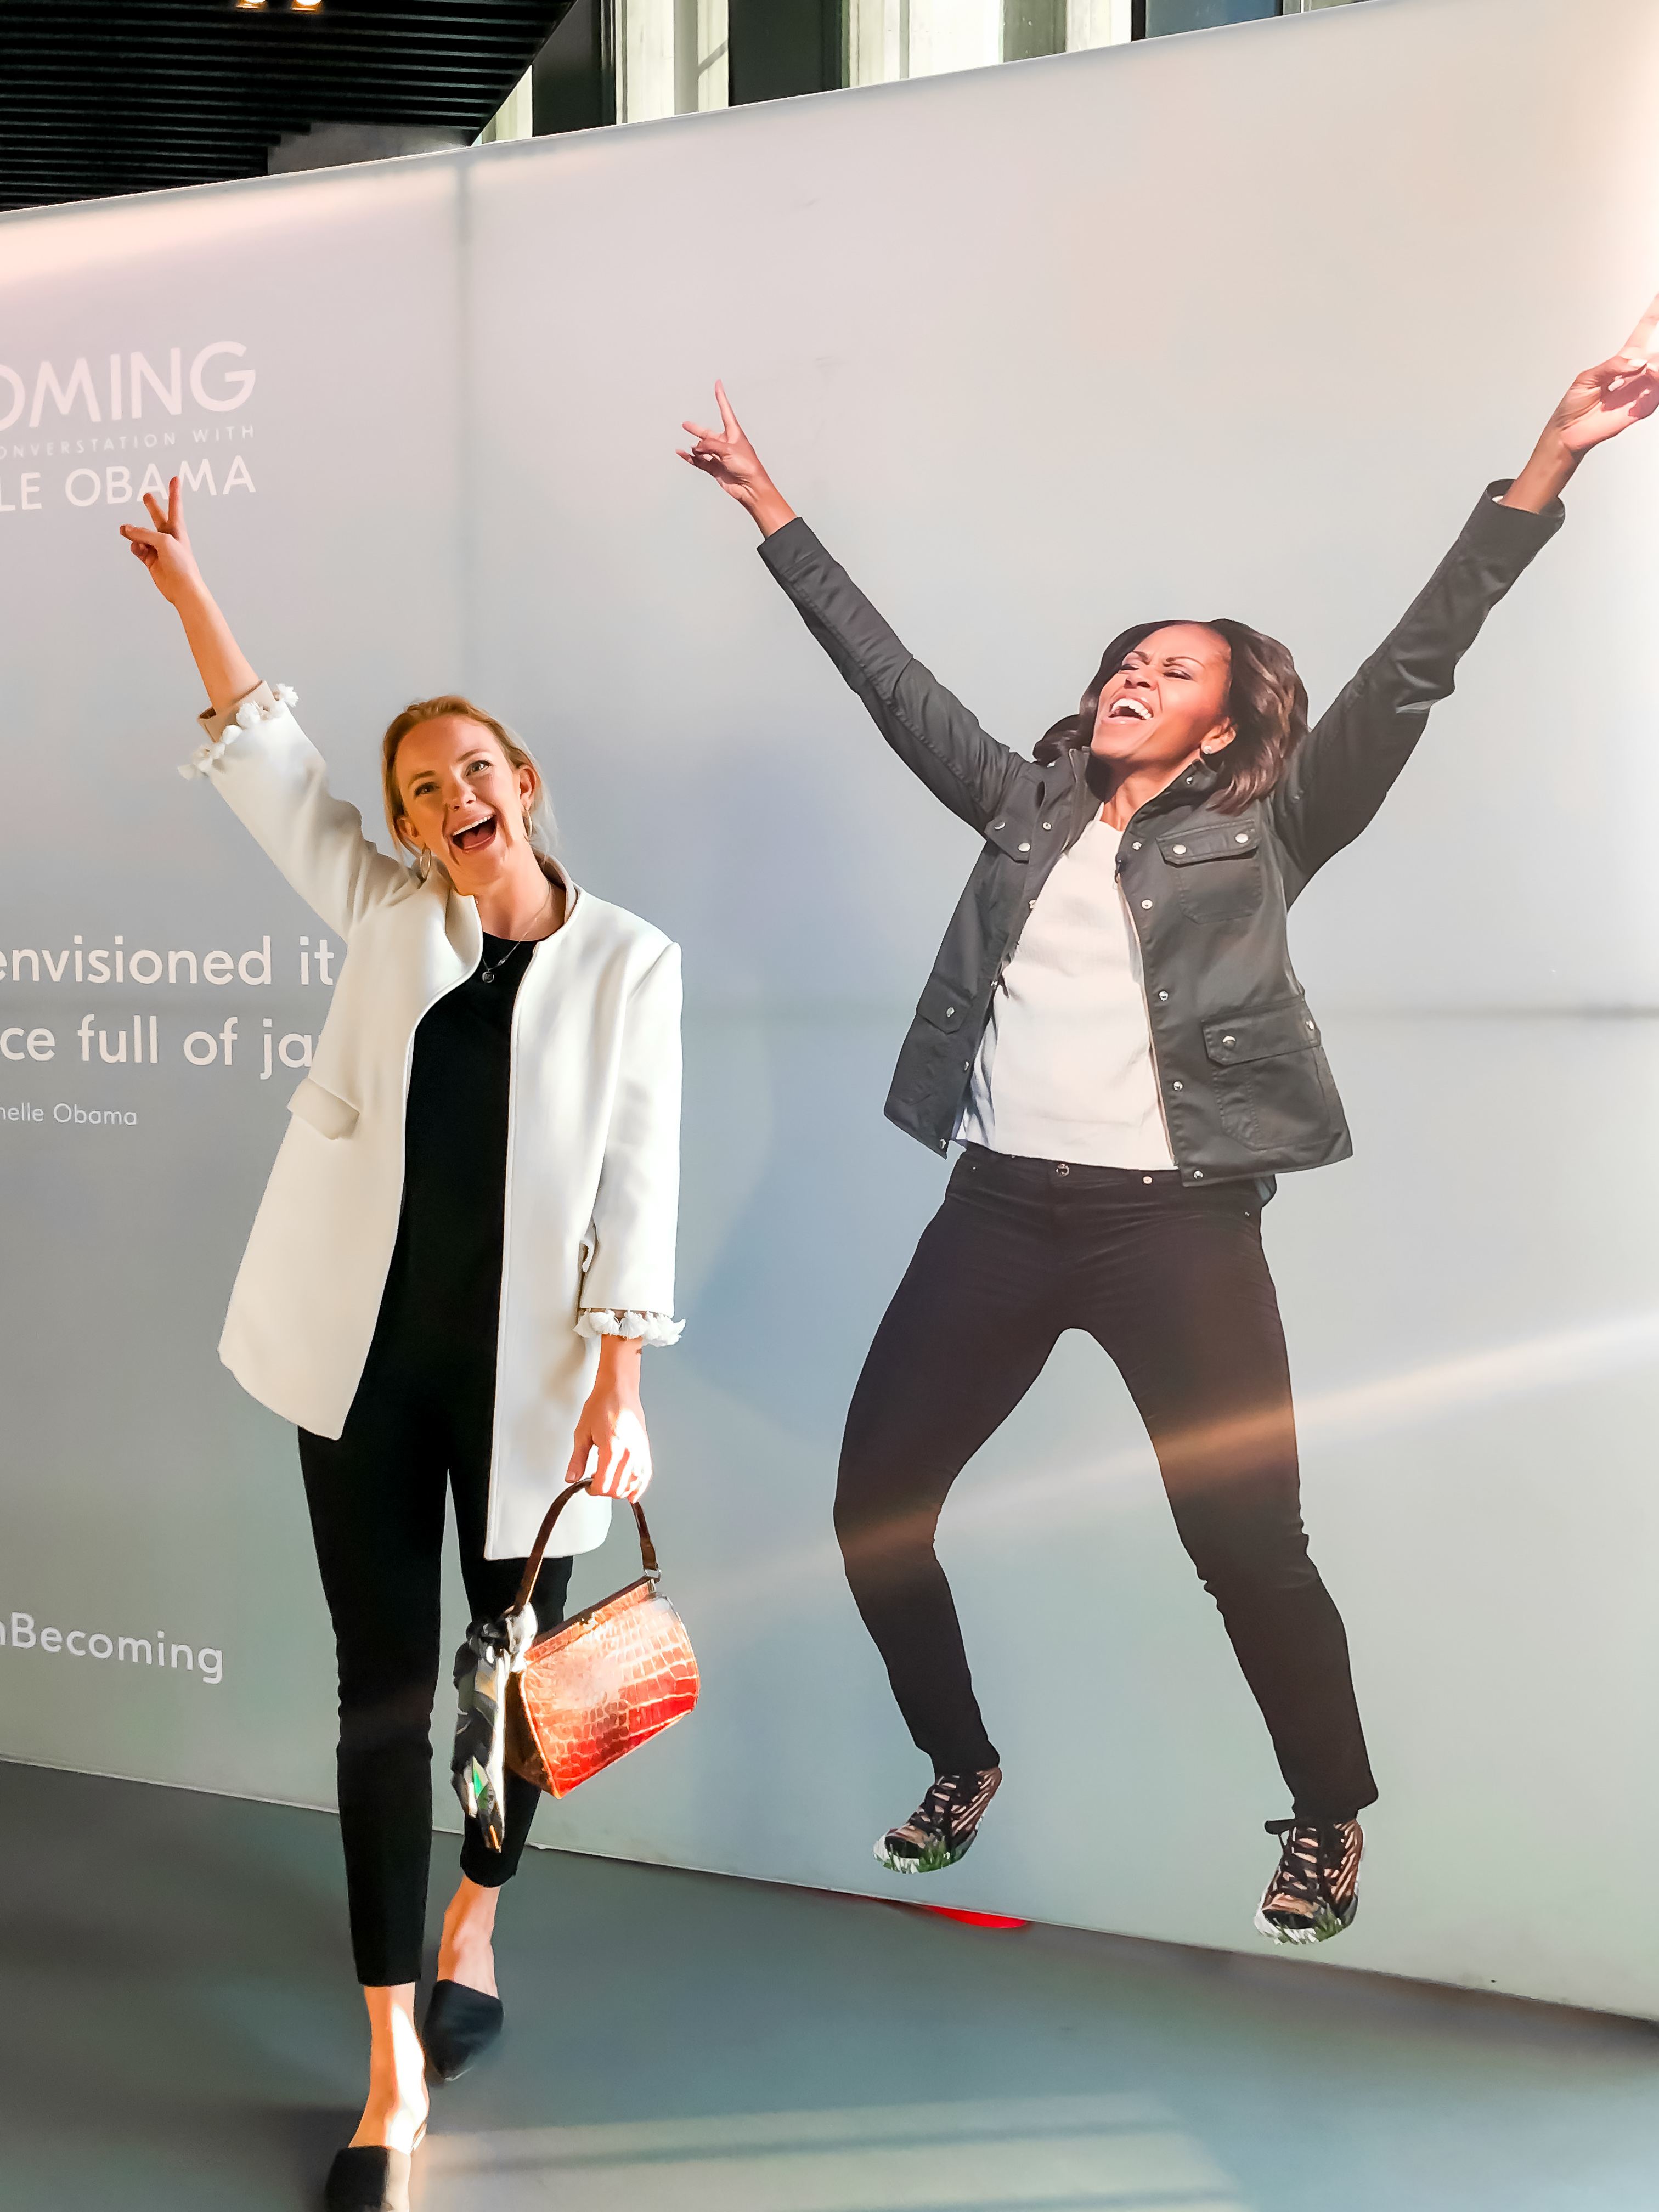 Posing next to an excited Michelle Obama on a poster at her Copenhagen stop on the Becoming Book Tour